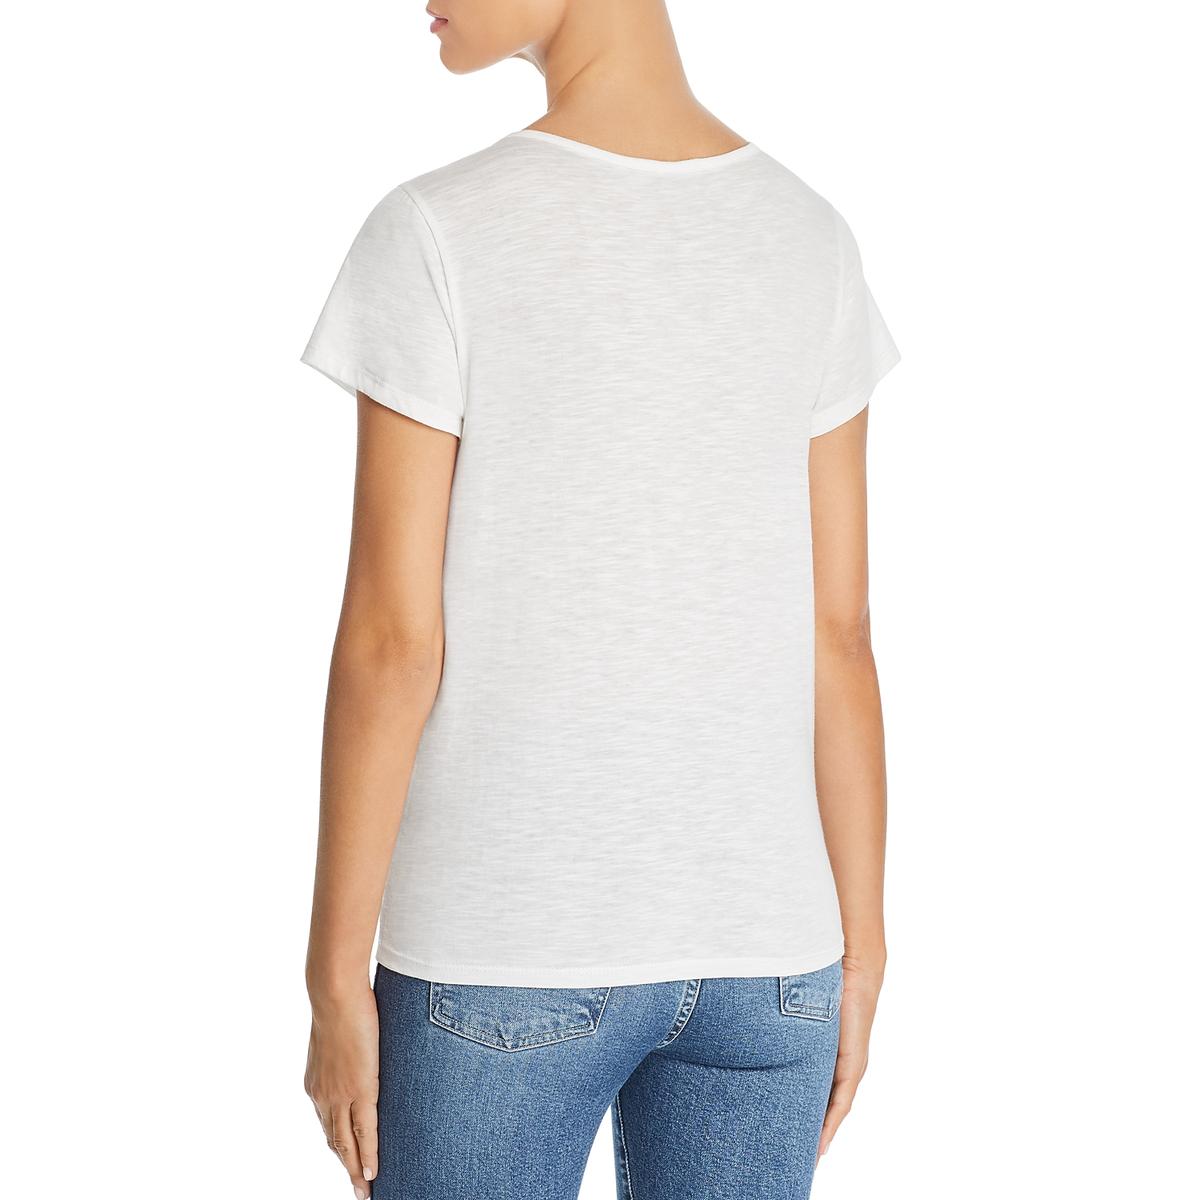 A+A Collection Womens White Cut-Out Short Sleeve Tee T-Shirt Top L BHFO ...